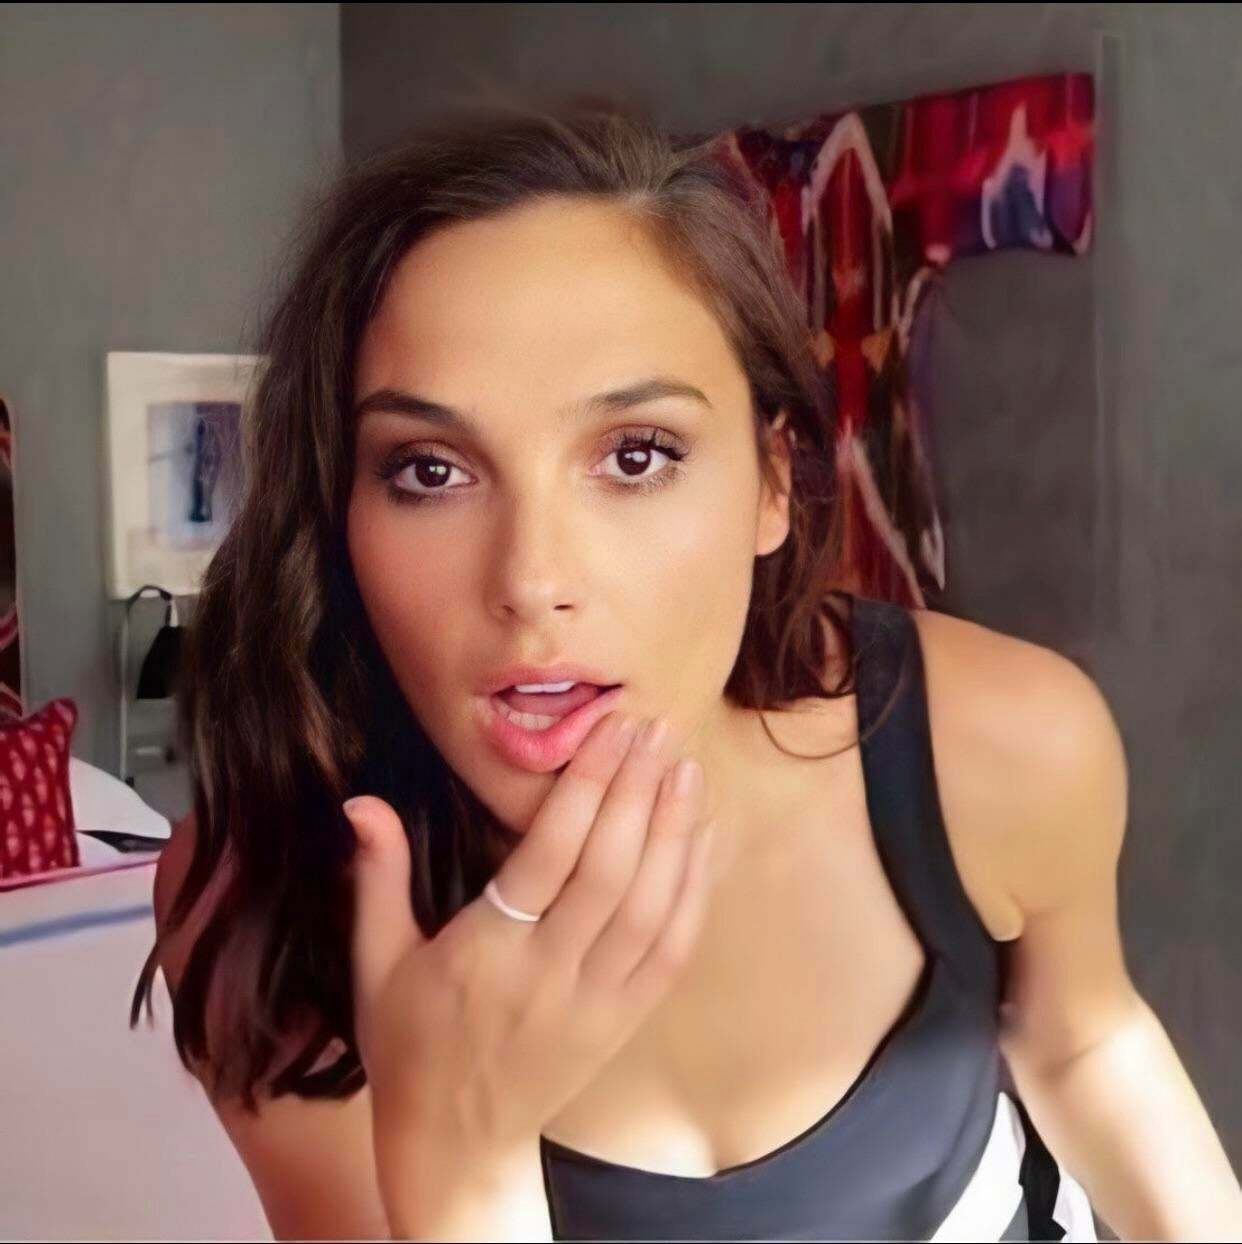 Gal gadot wiping off that load